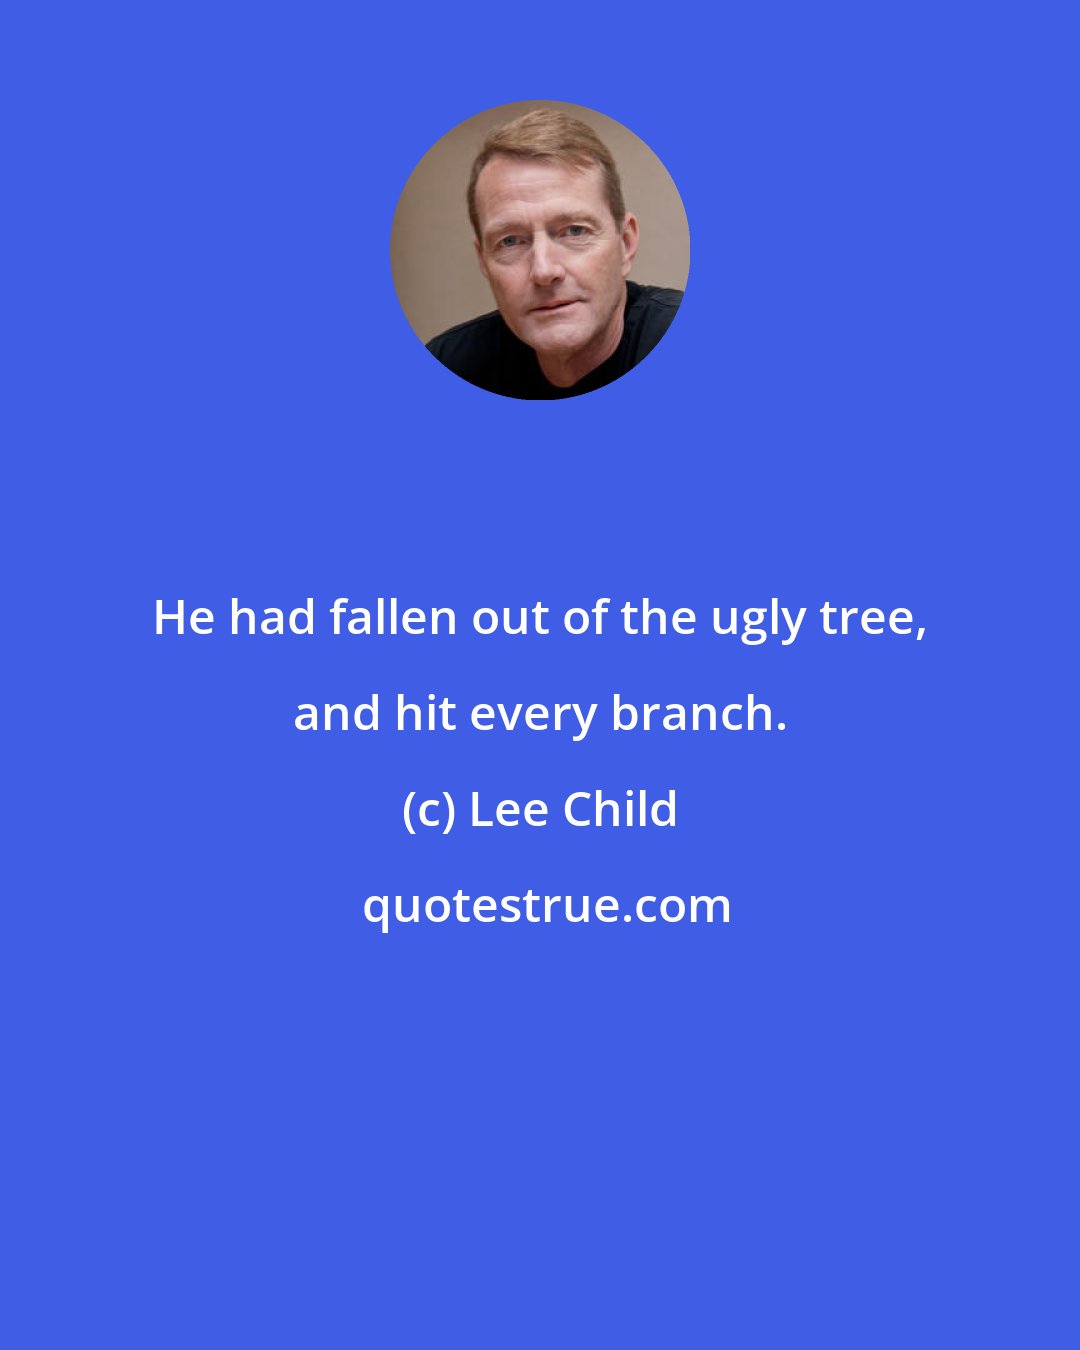 Lee Child: He had fallen out of the ugly tree, and hit every branch.